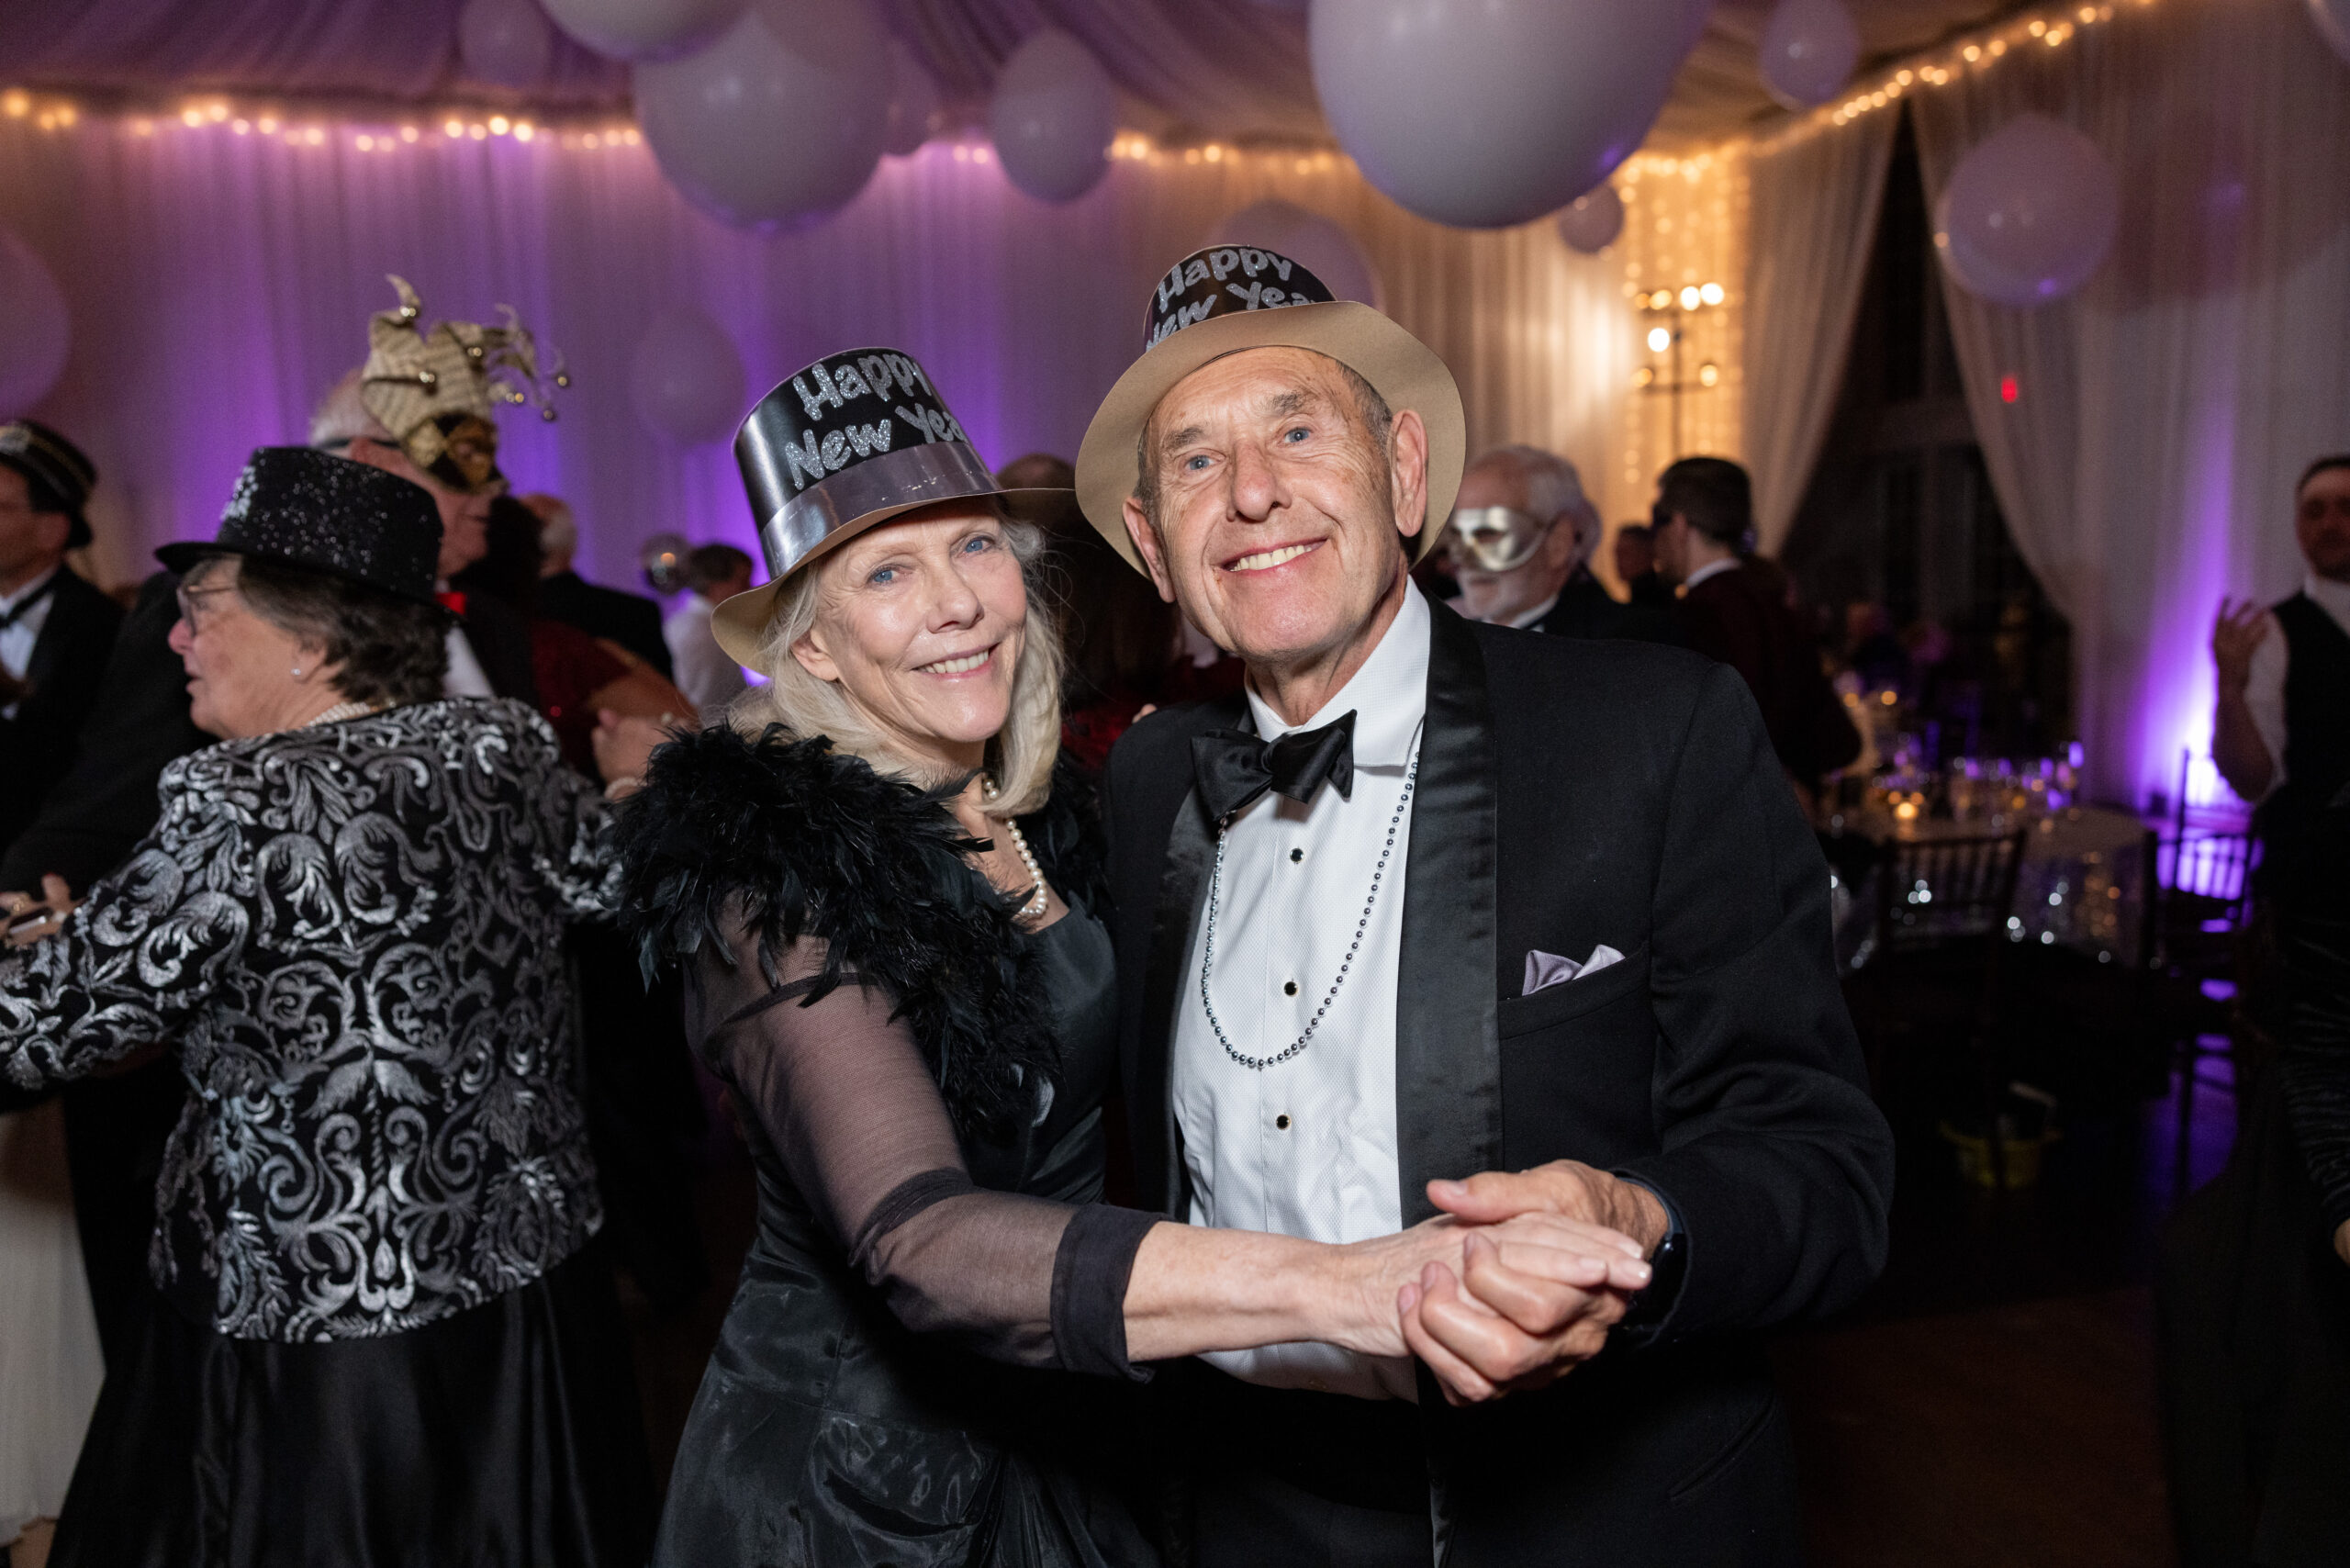 Patricia and Andrew Hodson dancing at the Veritas New Year's Eve Masked Ball on December 31, 2023 with decor and people in background. Photo taken by Aaron Watson.